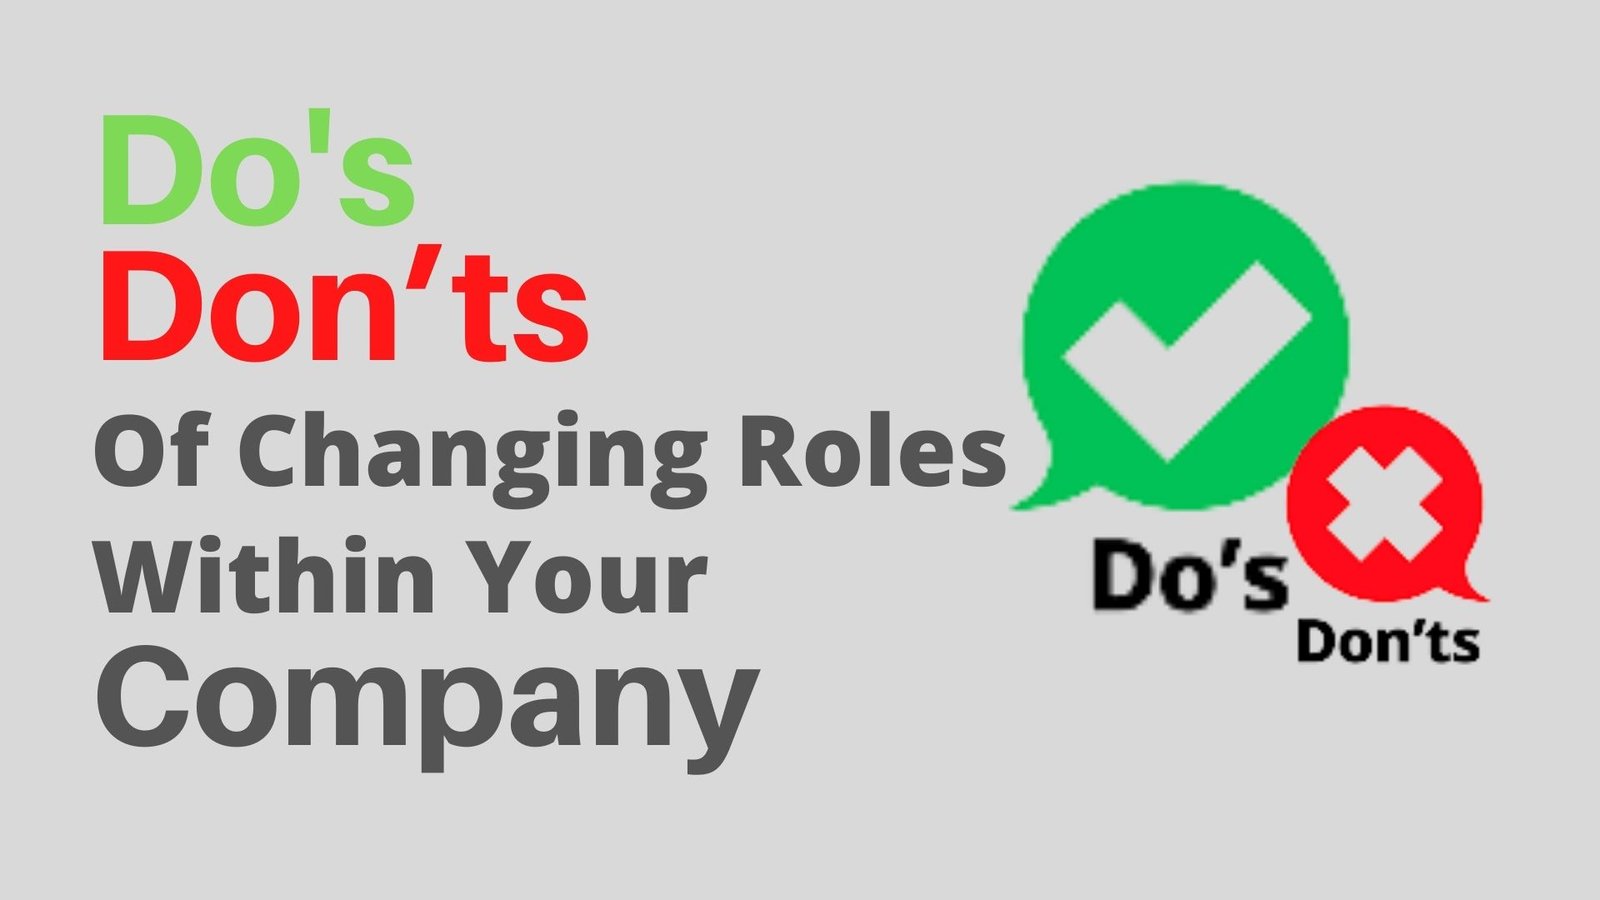 The Dos and Don’ts Of Changing Roles Within Your Company